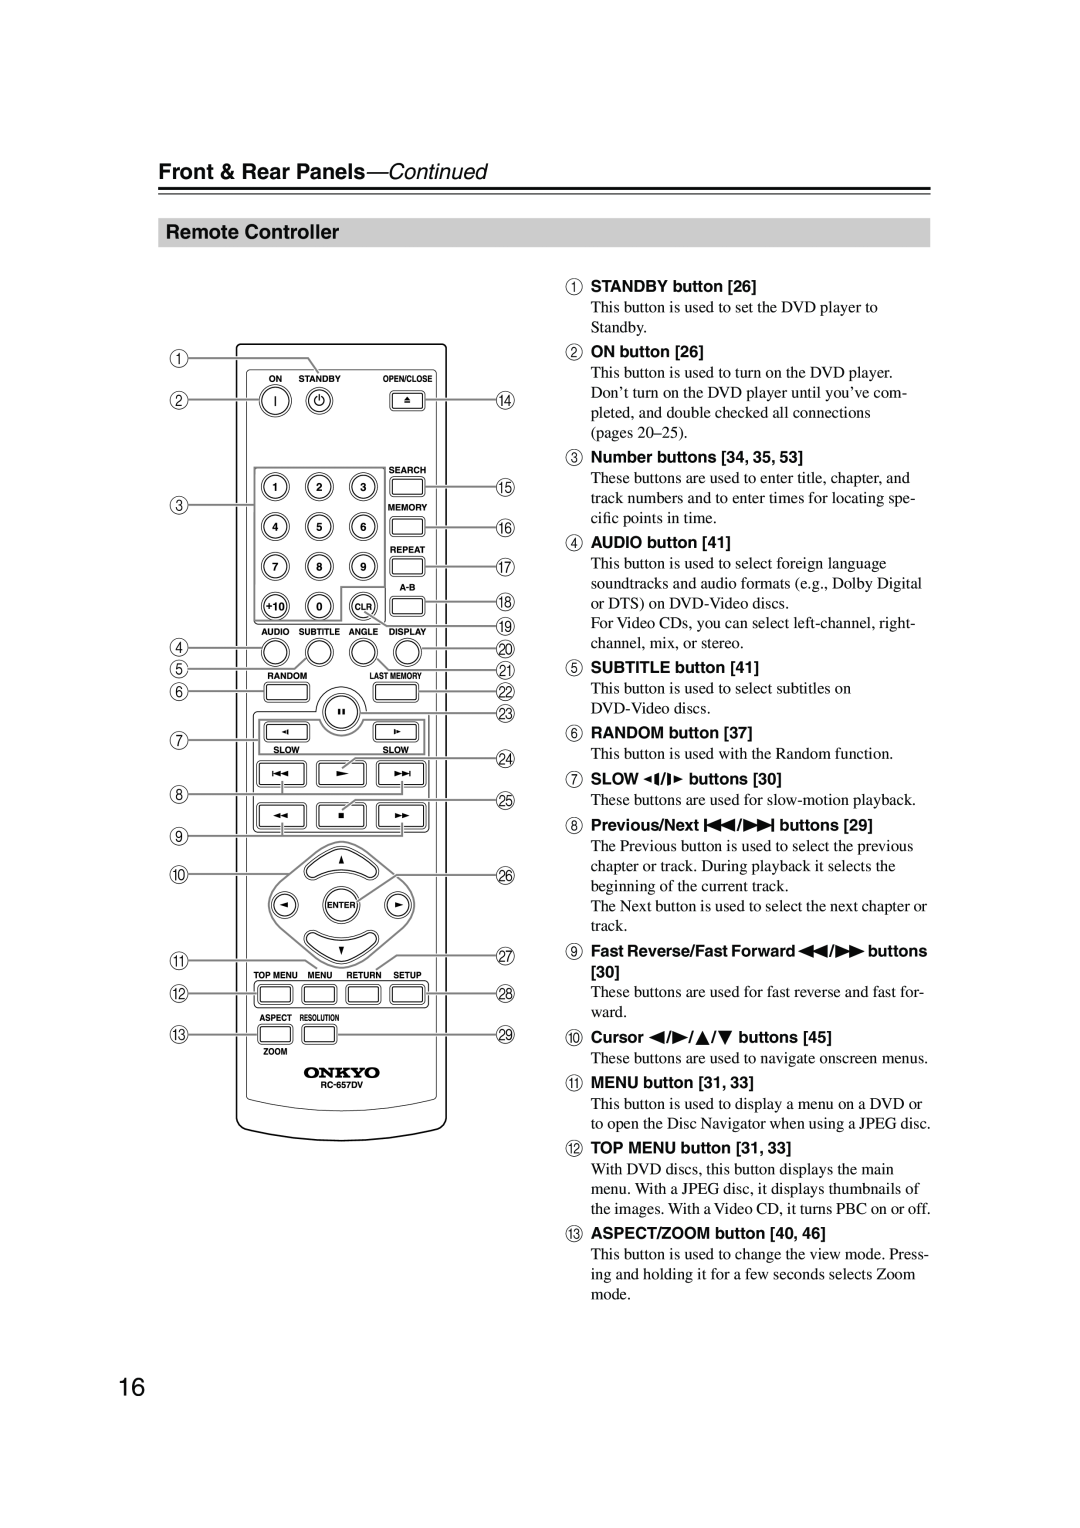 Onkyo DV-SP504E instruction manual Remote Controller, Front & Rear Panels-Continued 